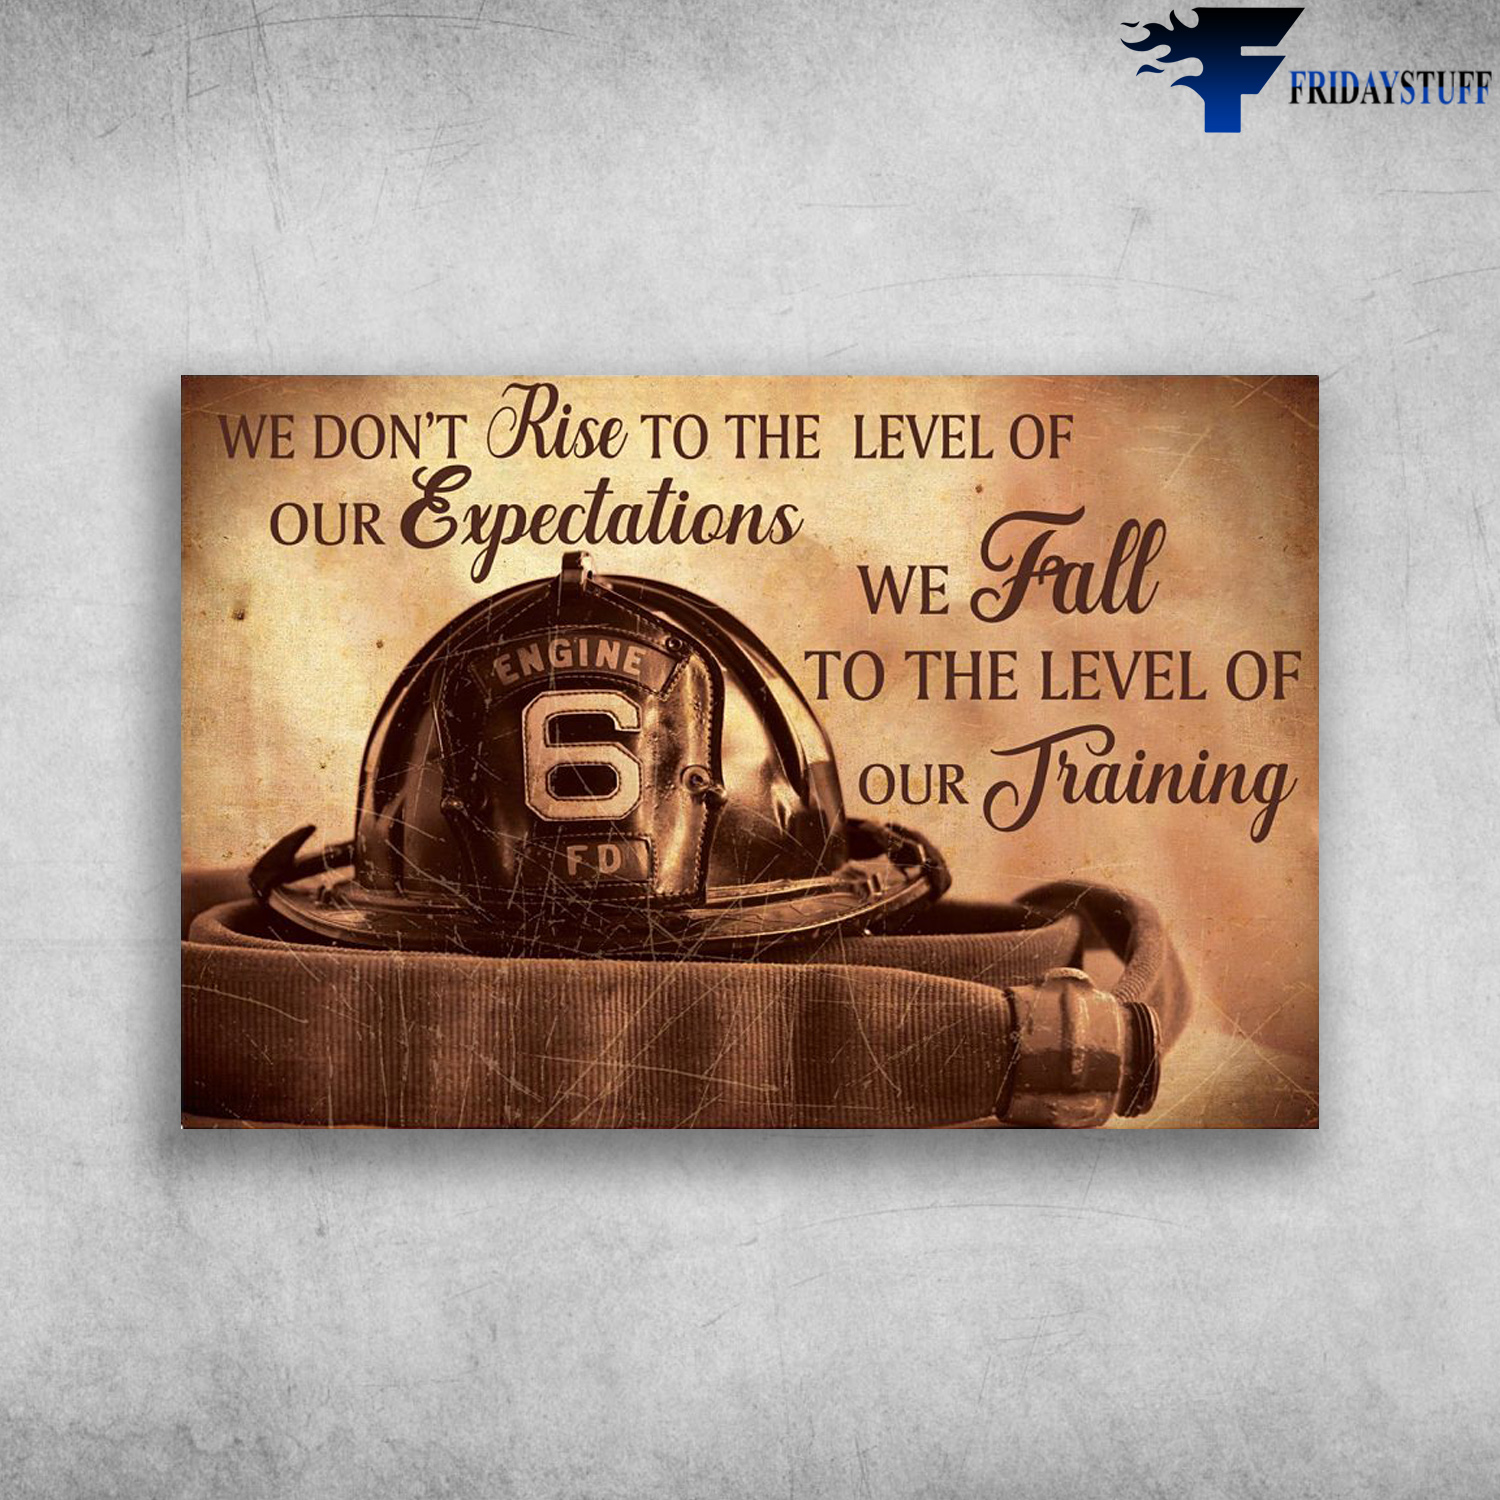 Firefighter's Hat - We Don't Ride To The Level Of Our Expectations, We Fall To The Level Of Our Training